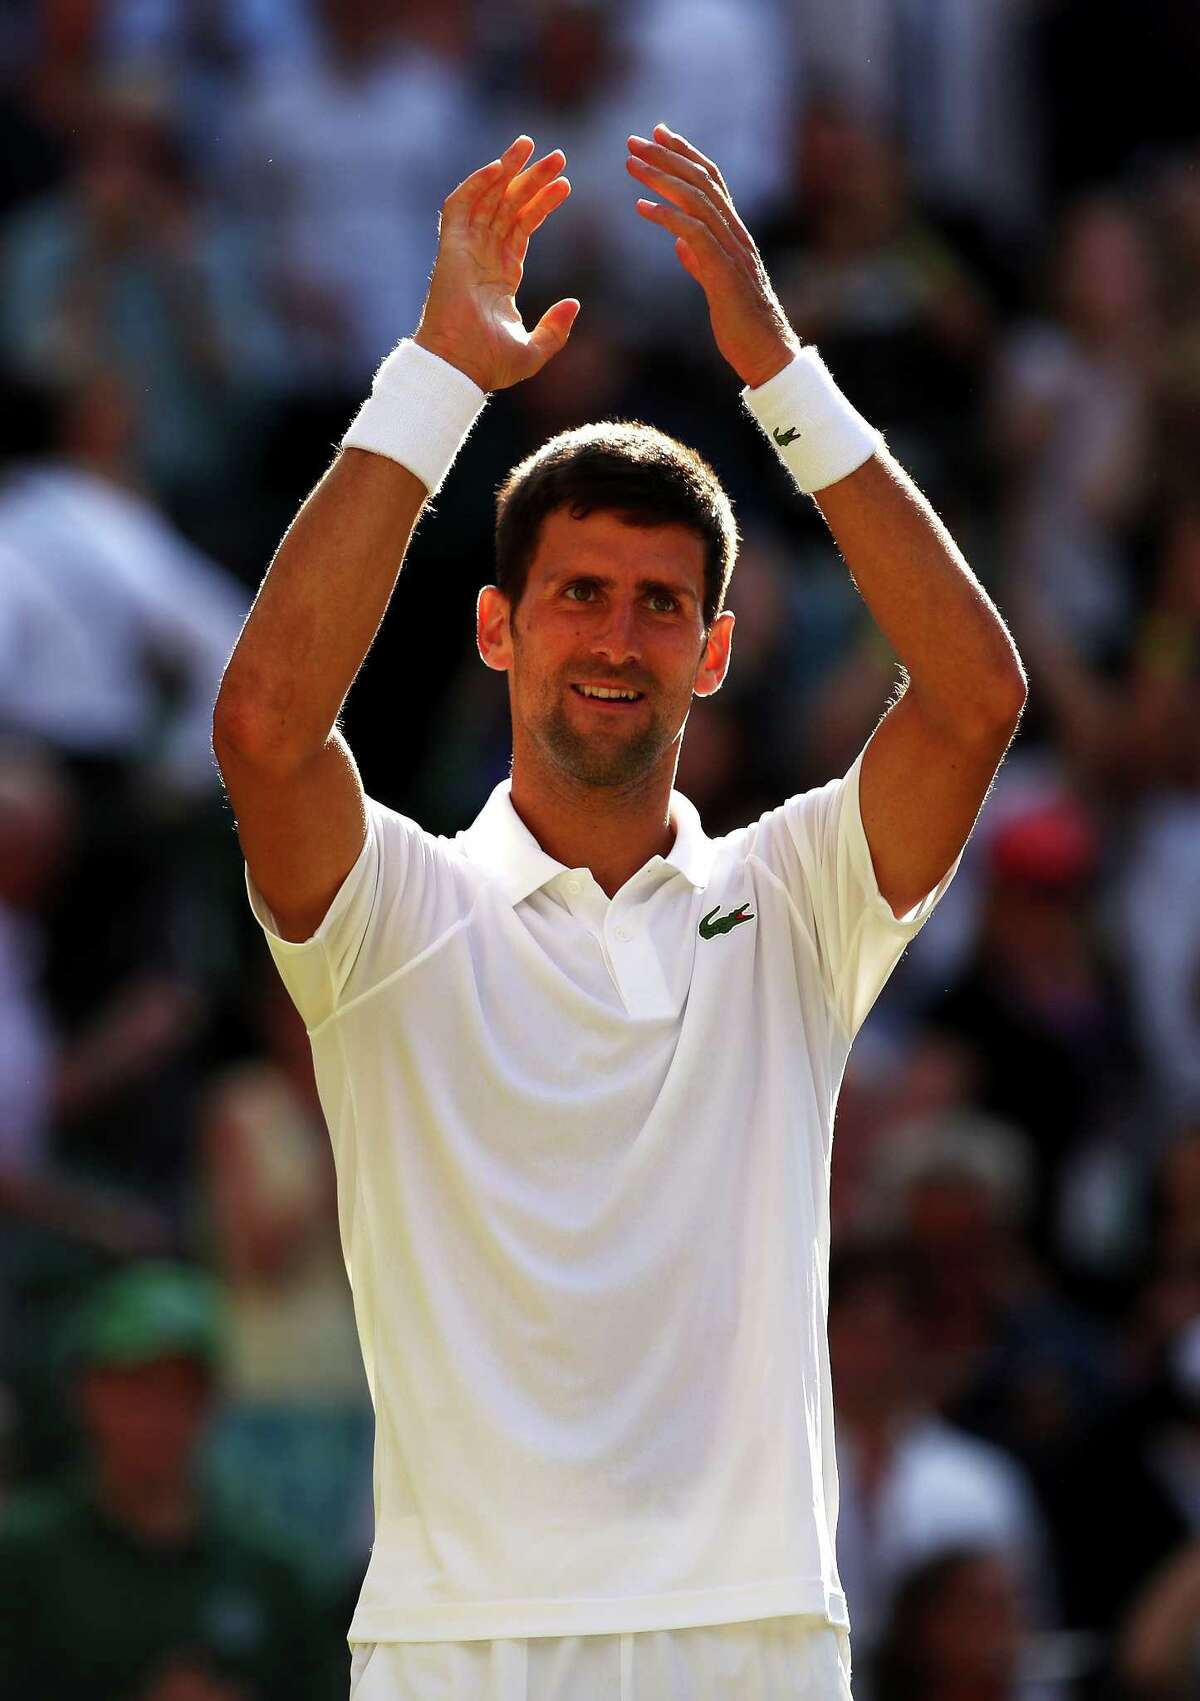 LONDON, ENGLAND - JULY 08: Novak Djokovic of Serbia celebrates victory after the Gentlemen's Singles third round match against Ernests Gulbis of Latvia on day six of the Wimbledon Lawn Tennis Championships at the All England Lawn Tennis and Croquet Club on July 8, 2017 in London, England. (Photo by Clive Brunskill/Getty Images)